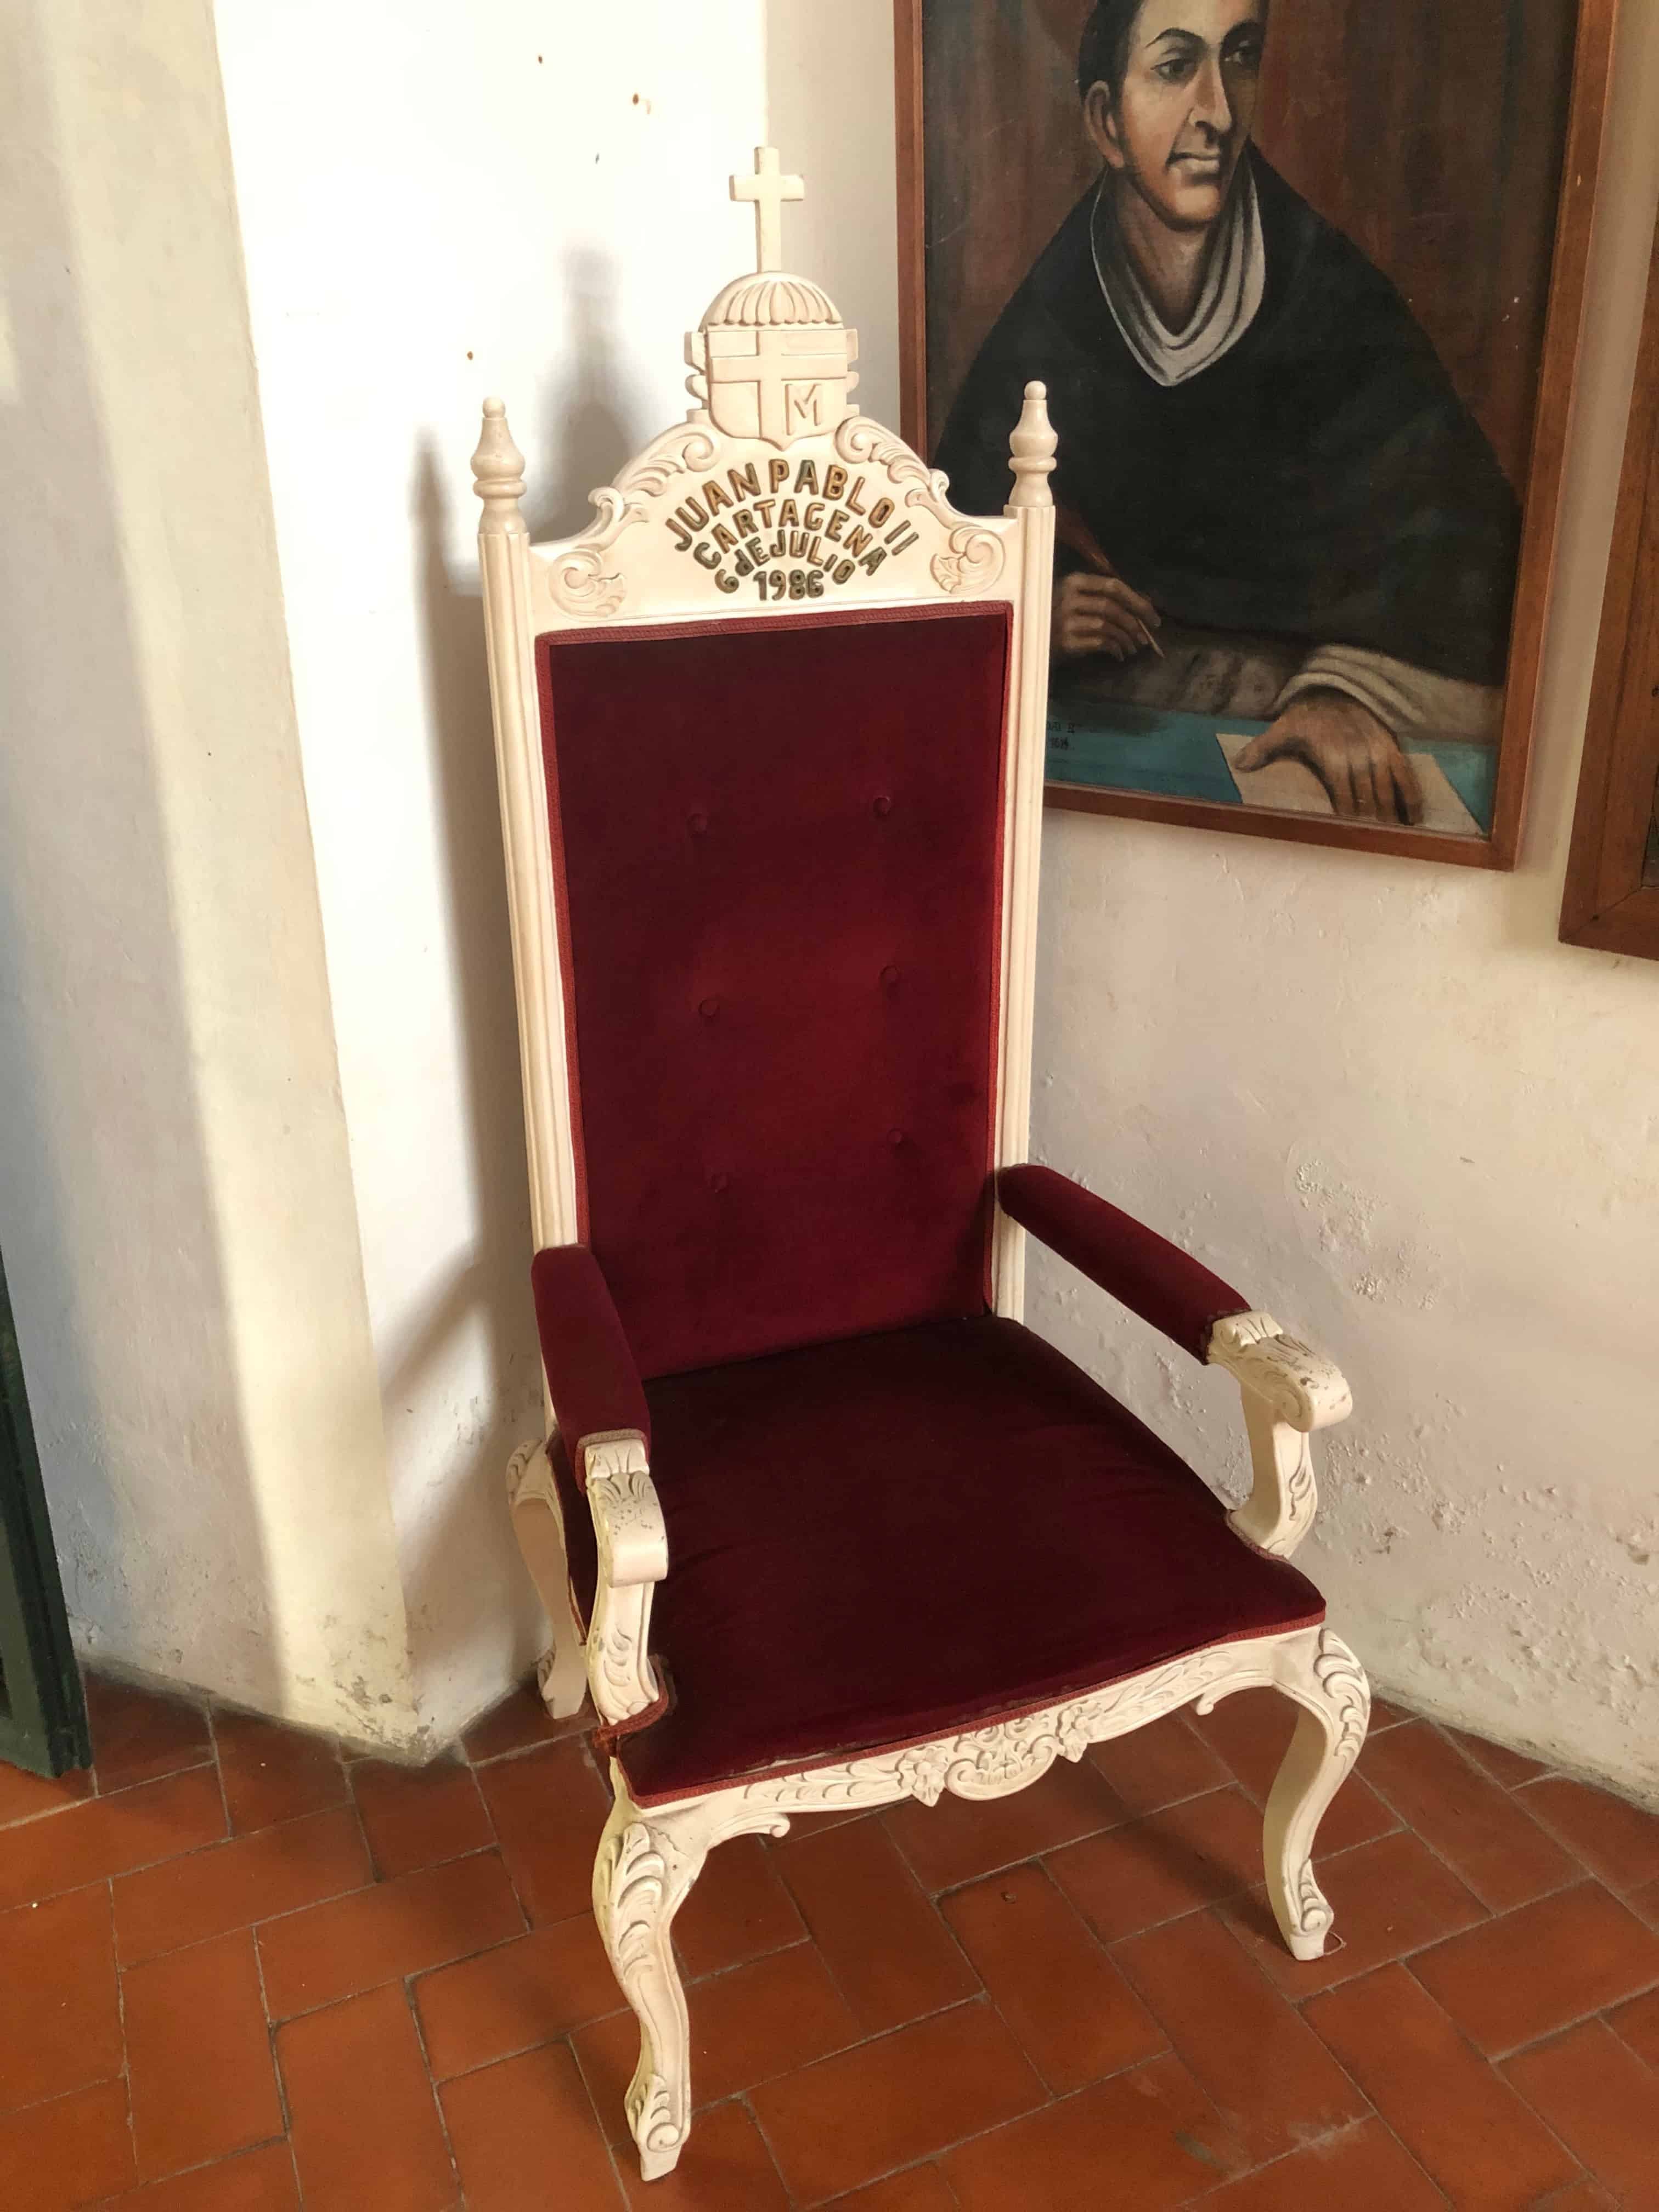 Chair used by Pope John Paul II at the Sanctuary of San Pedro Claver Museum in Cartagena, Colombia